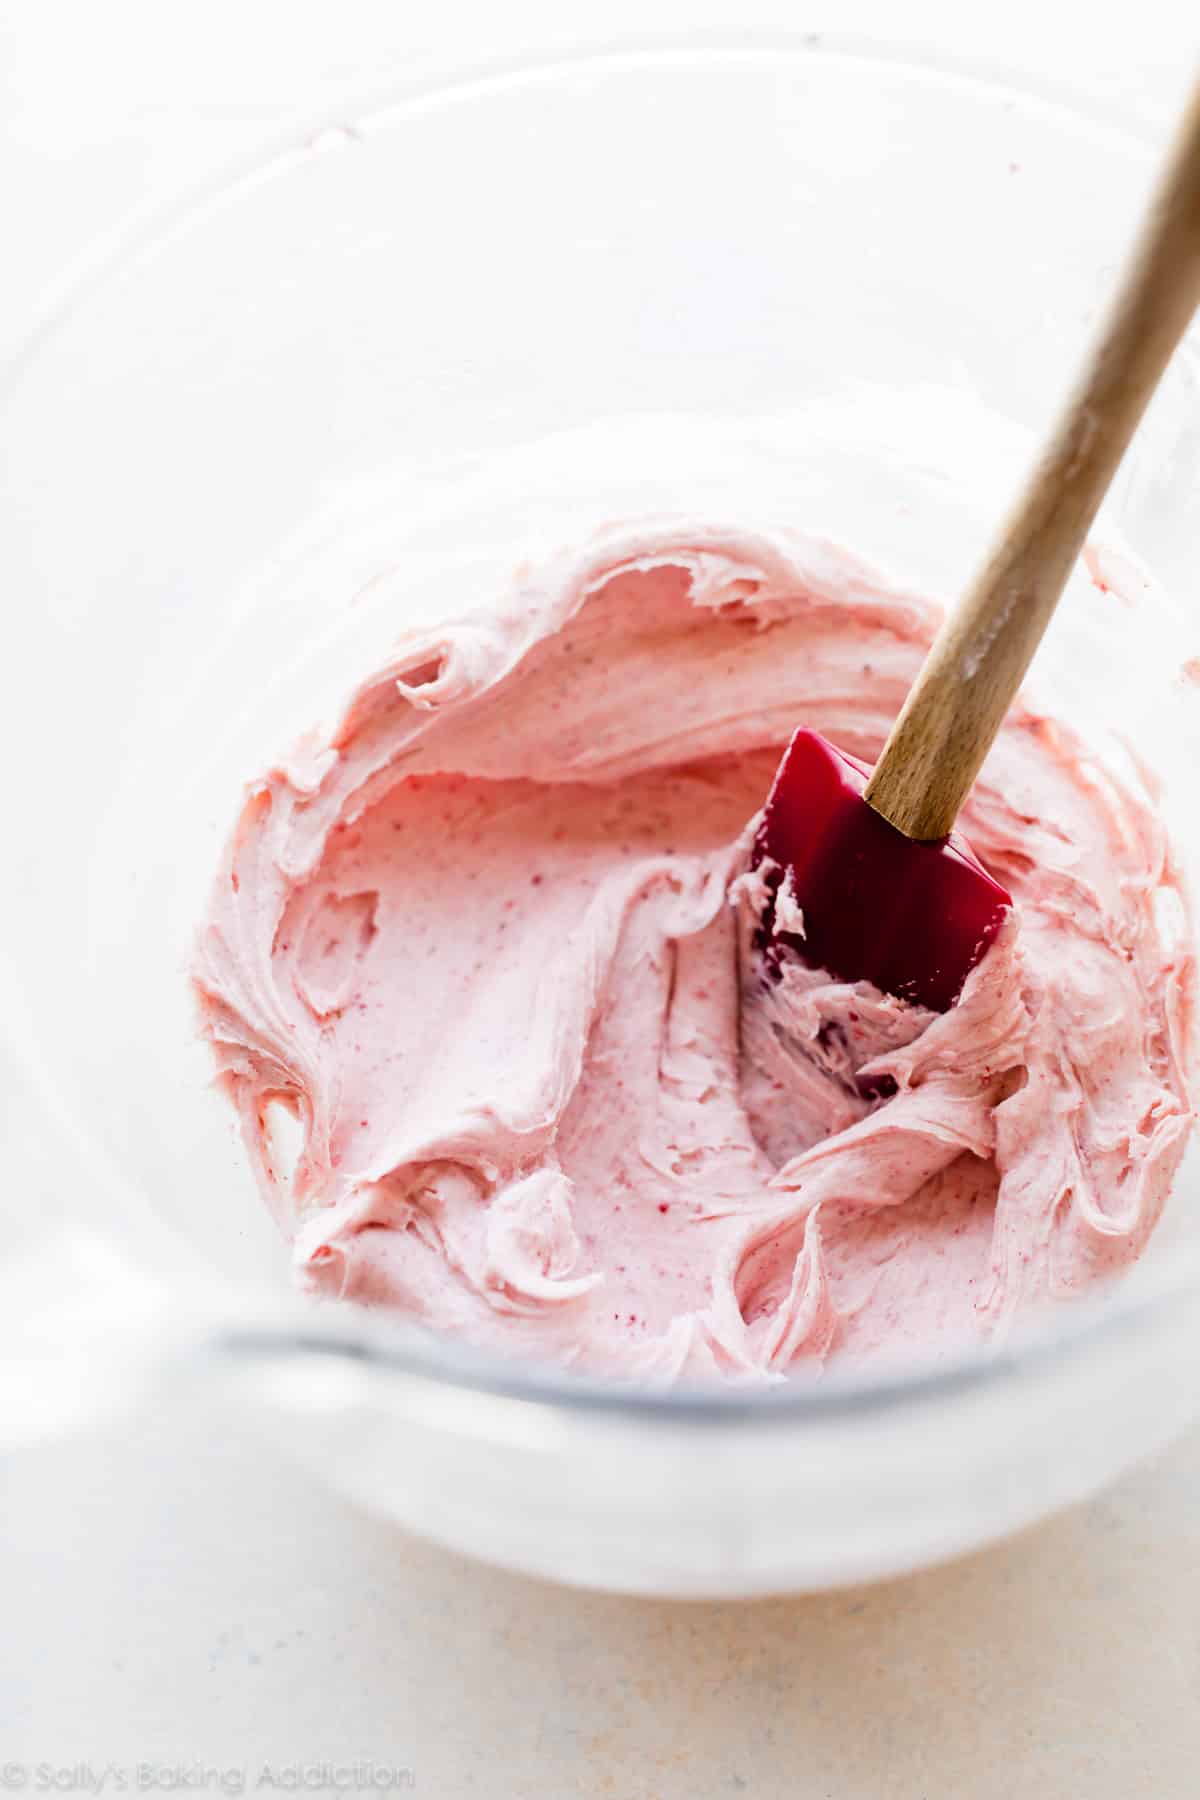 Creamy strawberry white chocolate frosting in a glass bowl